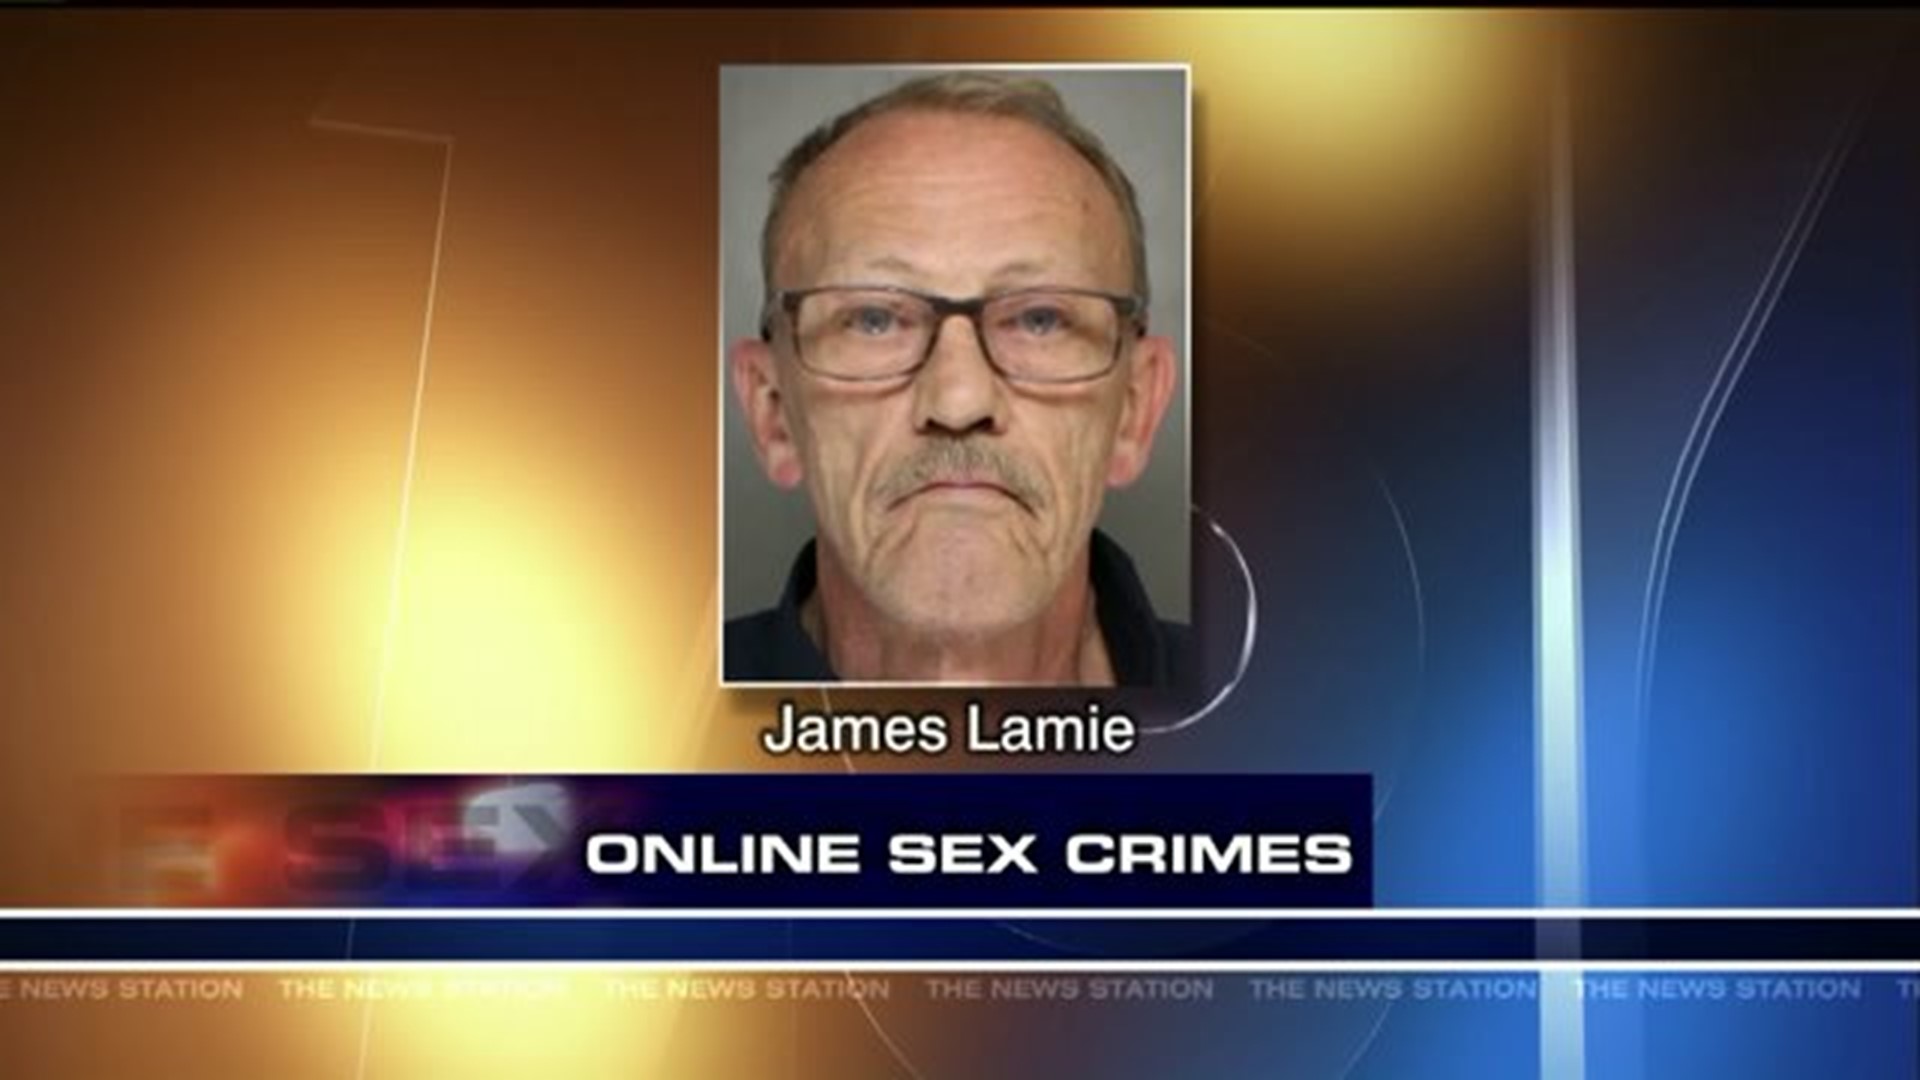 Man Has Sexually Explicit Conversations with Minors, Arrested for Child Porn